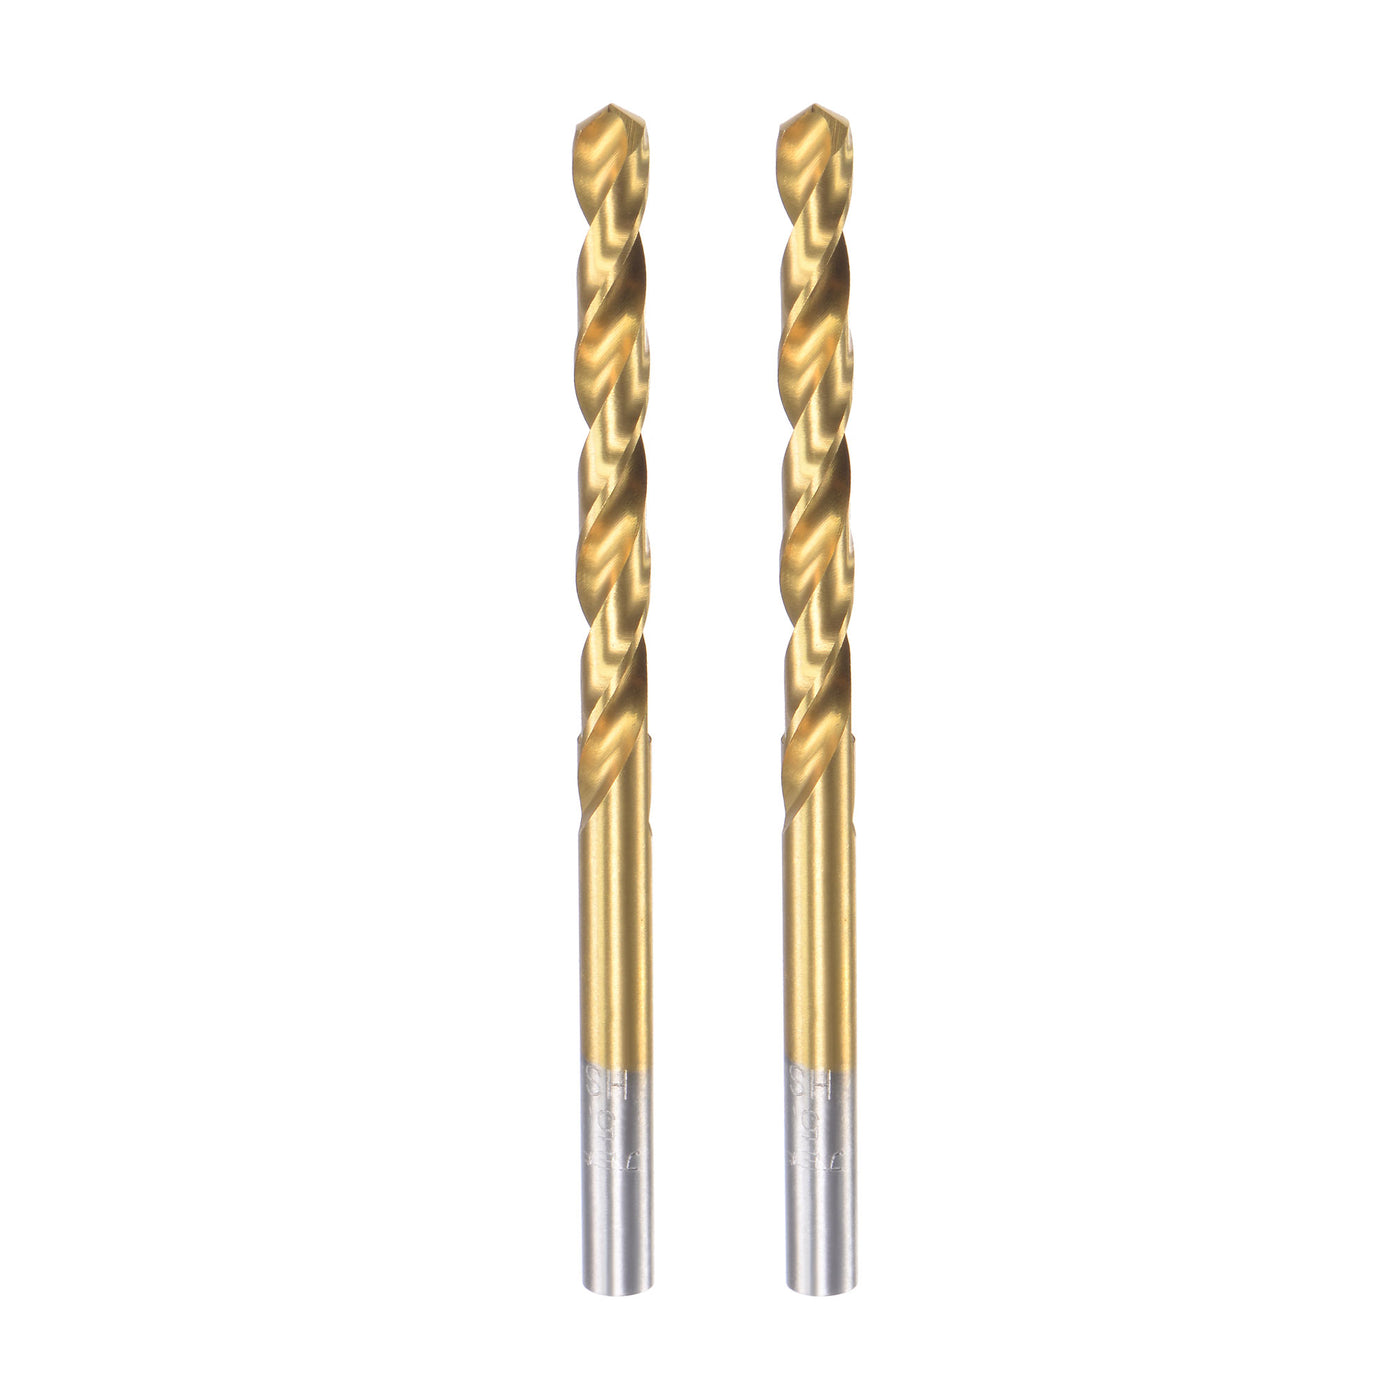 uxcell Uxcell High Speed Steel Twist Drill Bit 5.3mm Fully Ground Titanium Coated 2 Pcs